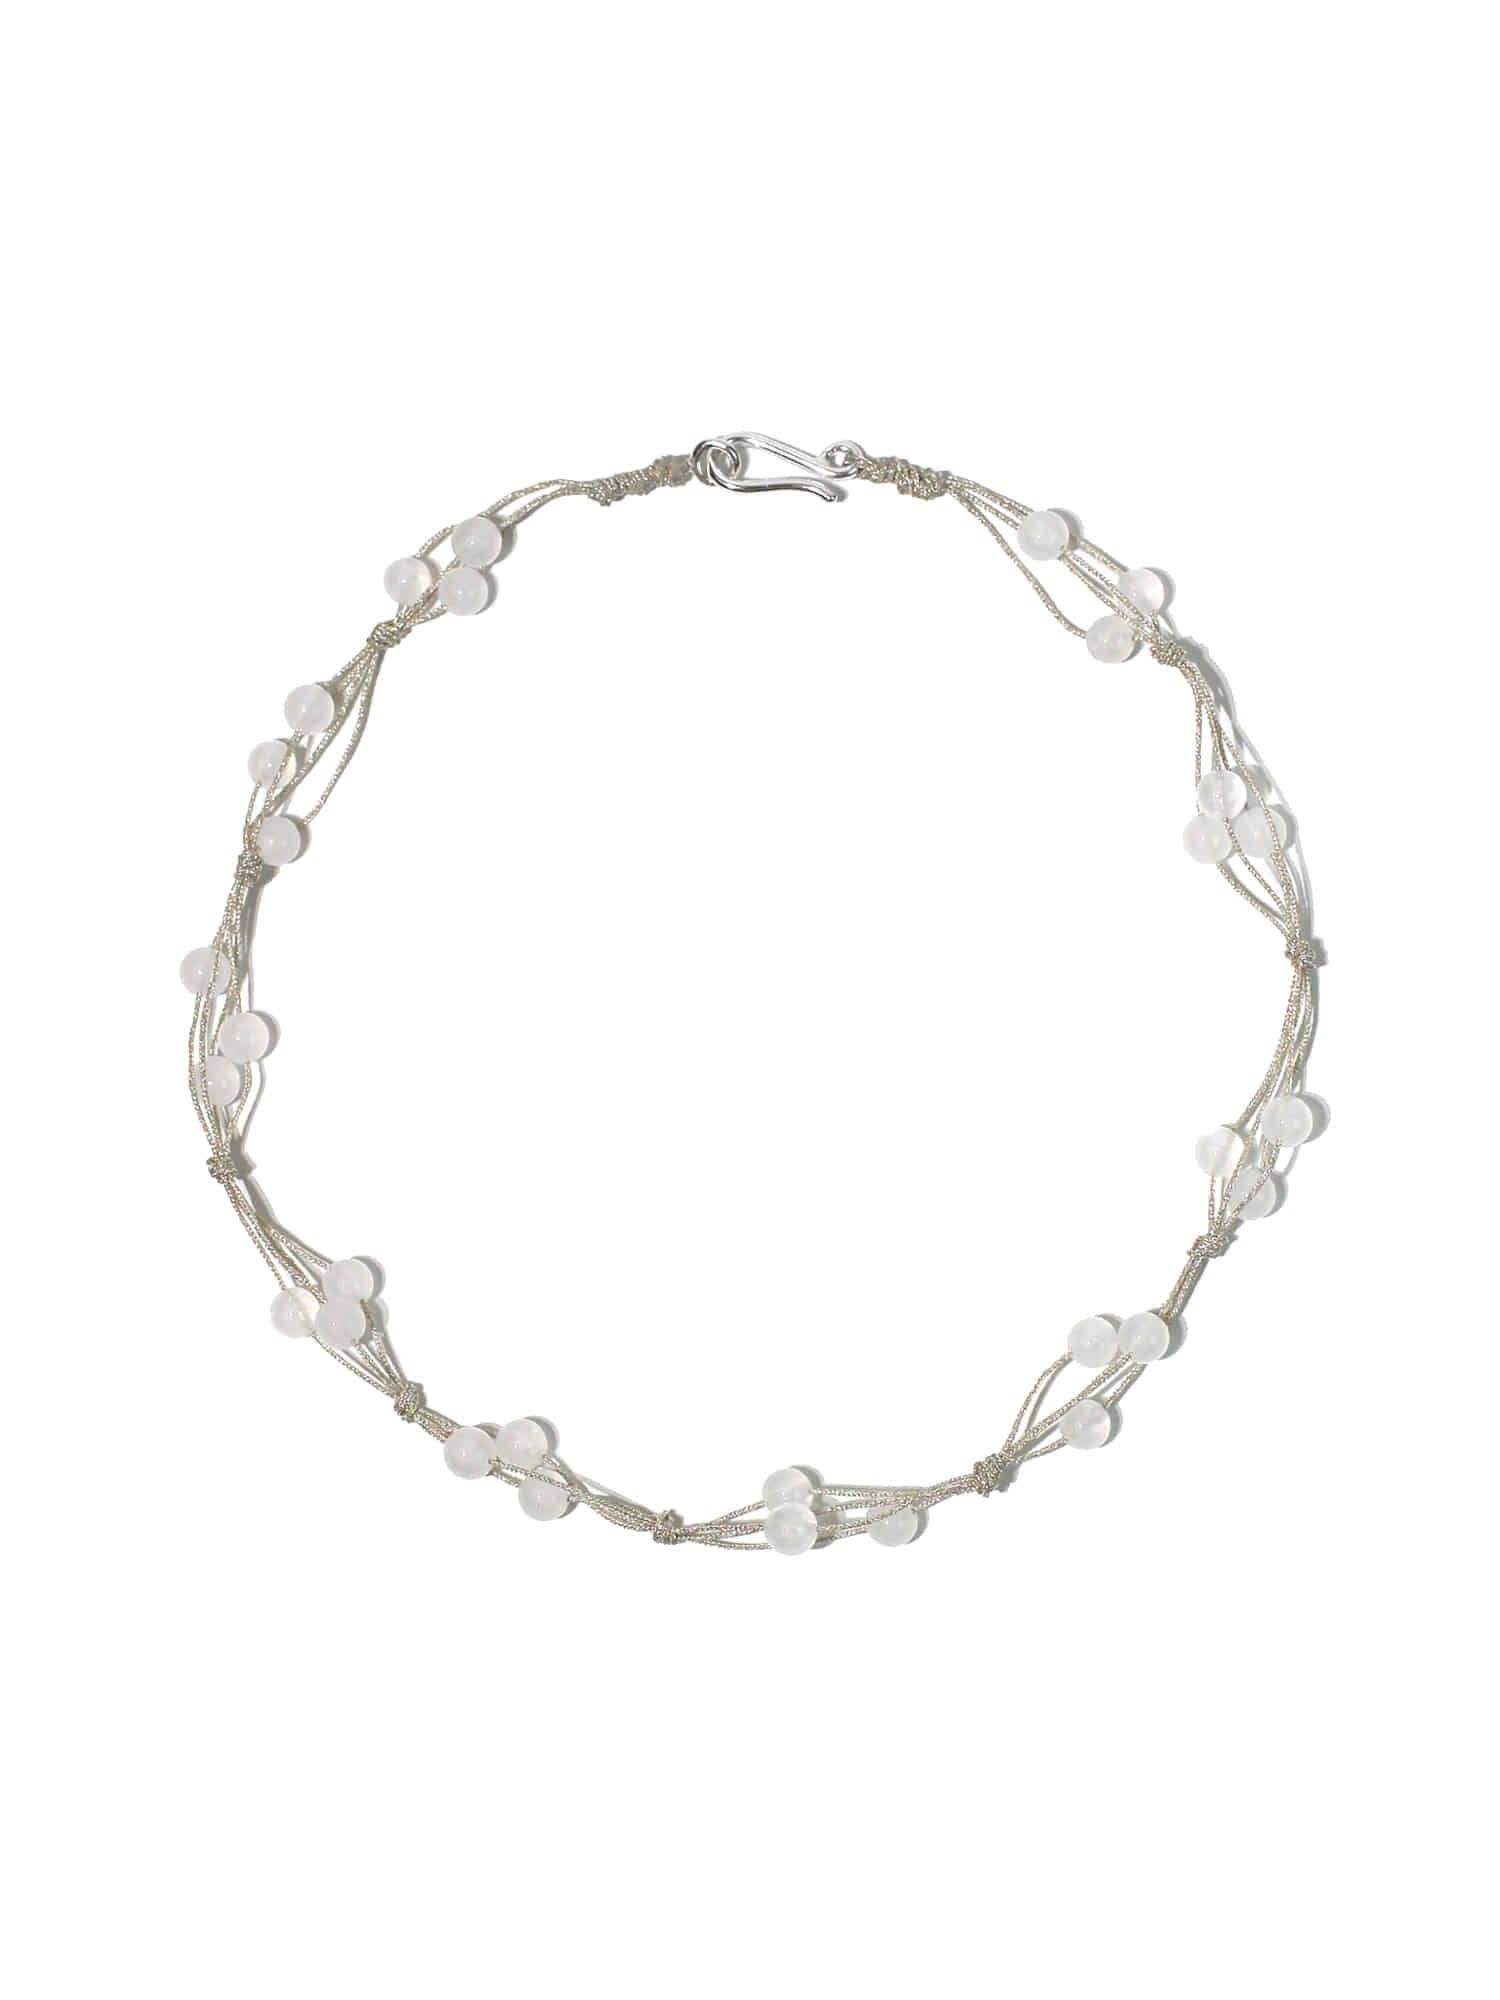 Knot Necklace (White Jade)